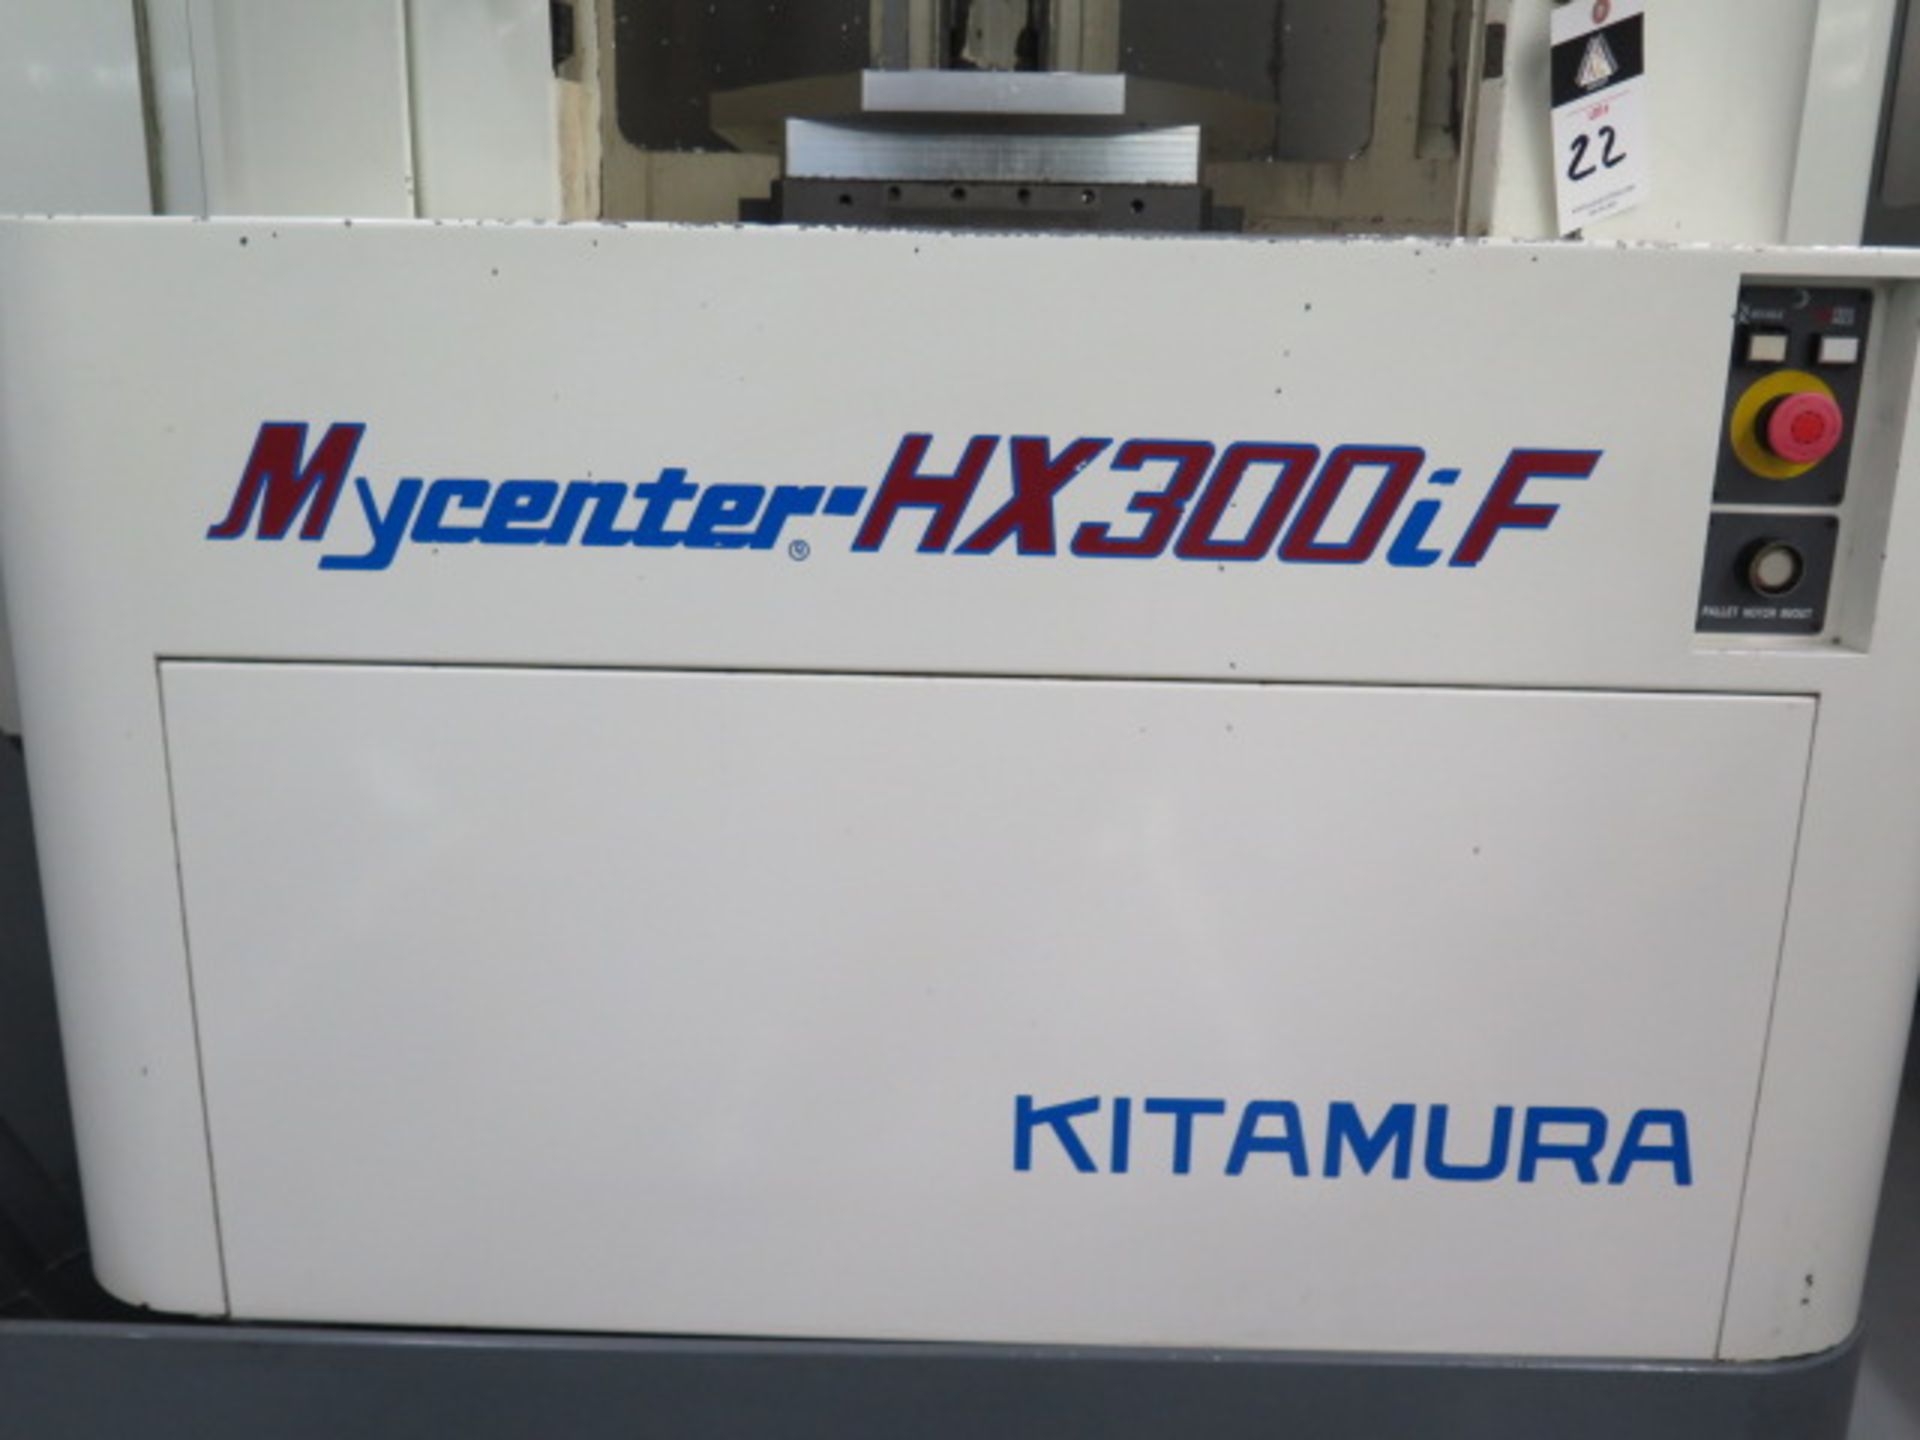 Kitamura Mycenter HX300iF 2-Paller 4-Axis CNC Horizontal Machining Center s/n 40975 SOLD AS IS - Image 18 of 26